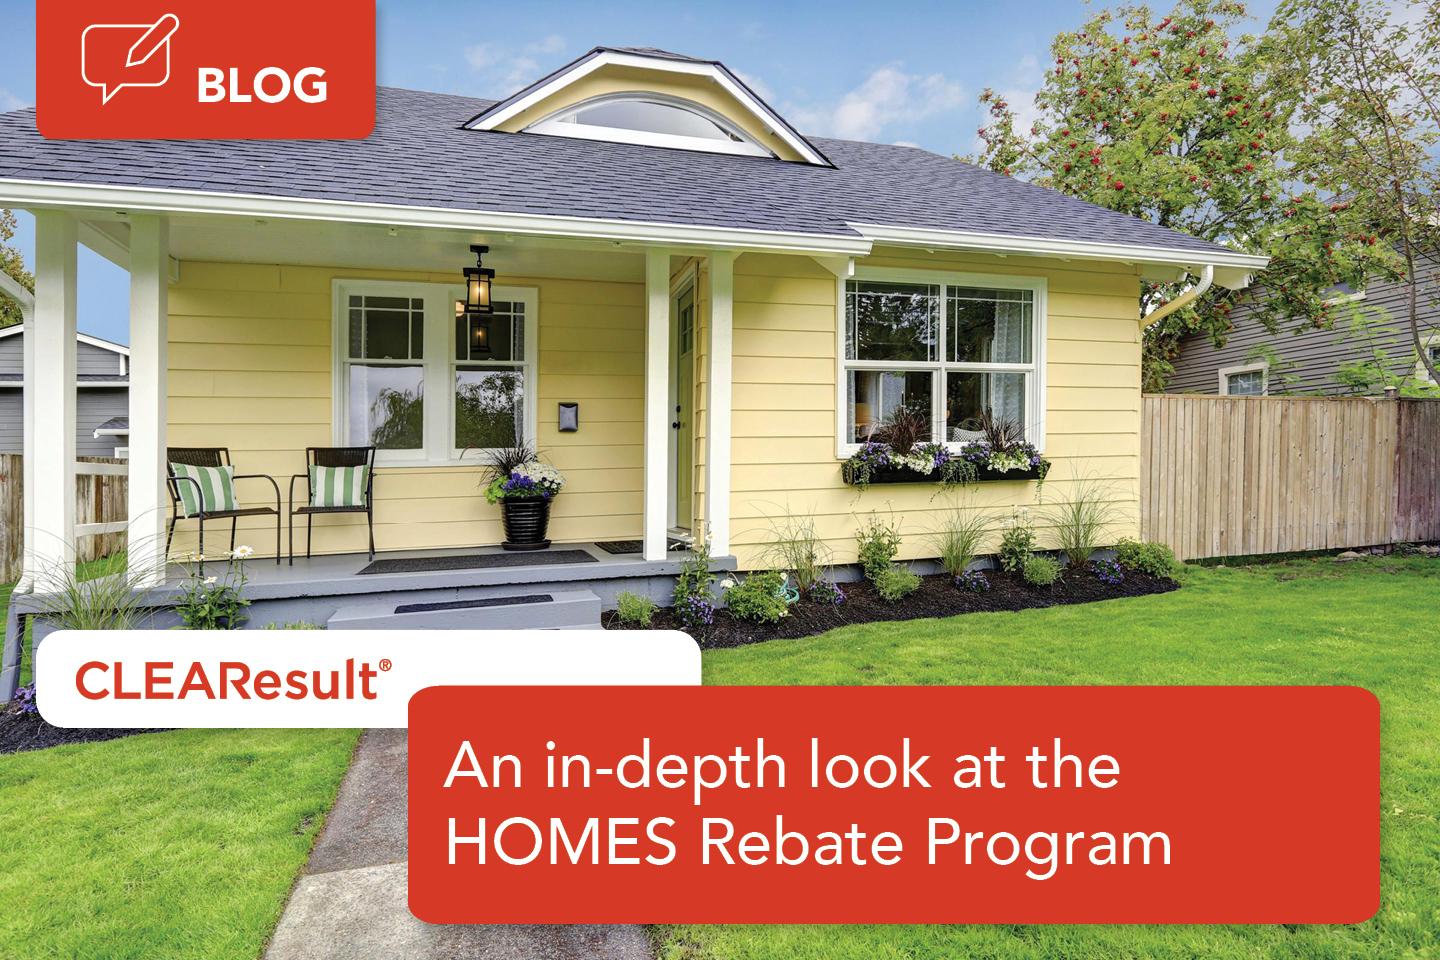 An in-depth look at the HOMES Rebate Program from the Inflation Reduction Act